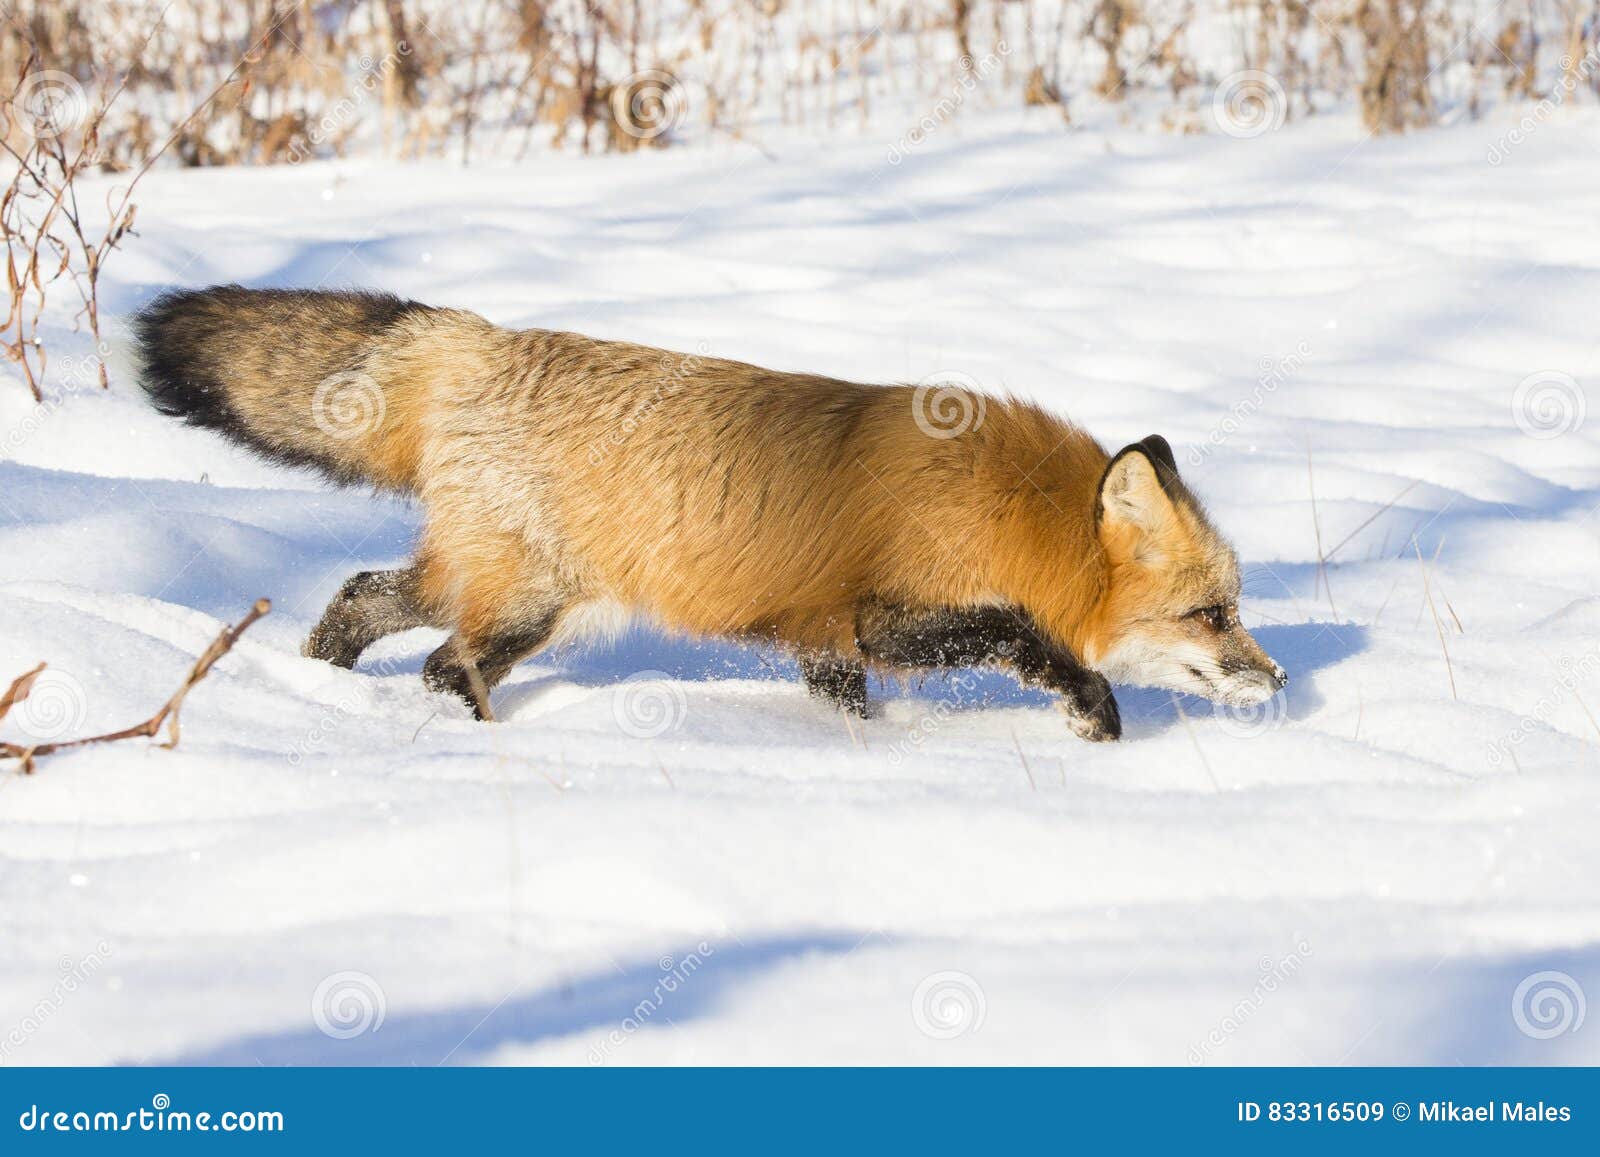 red fox intent on catching prey